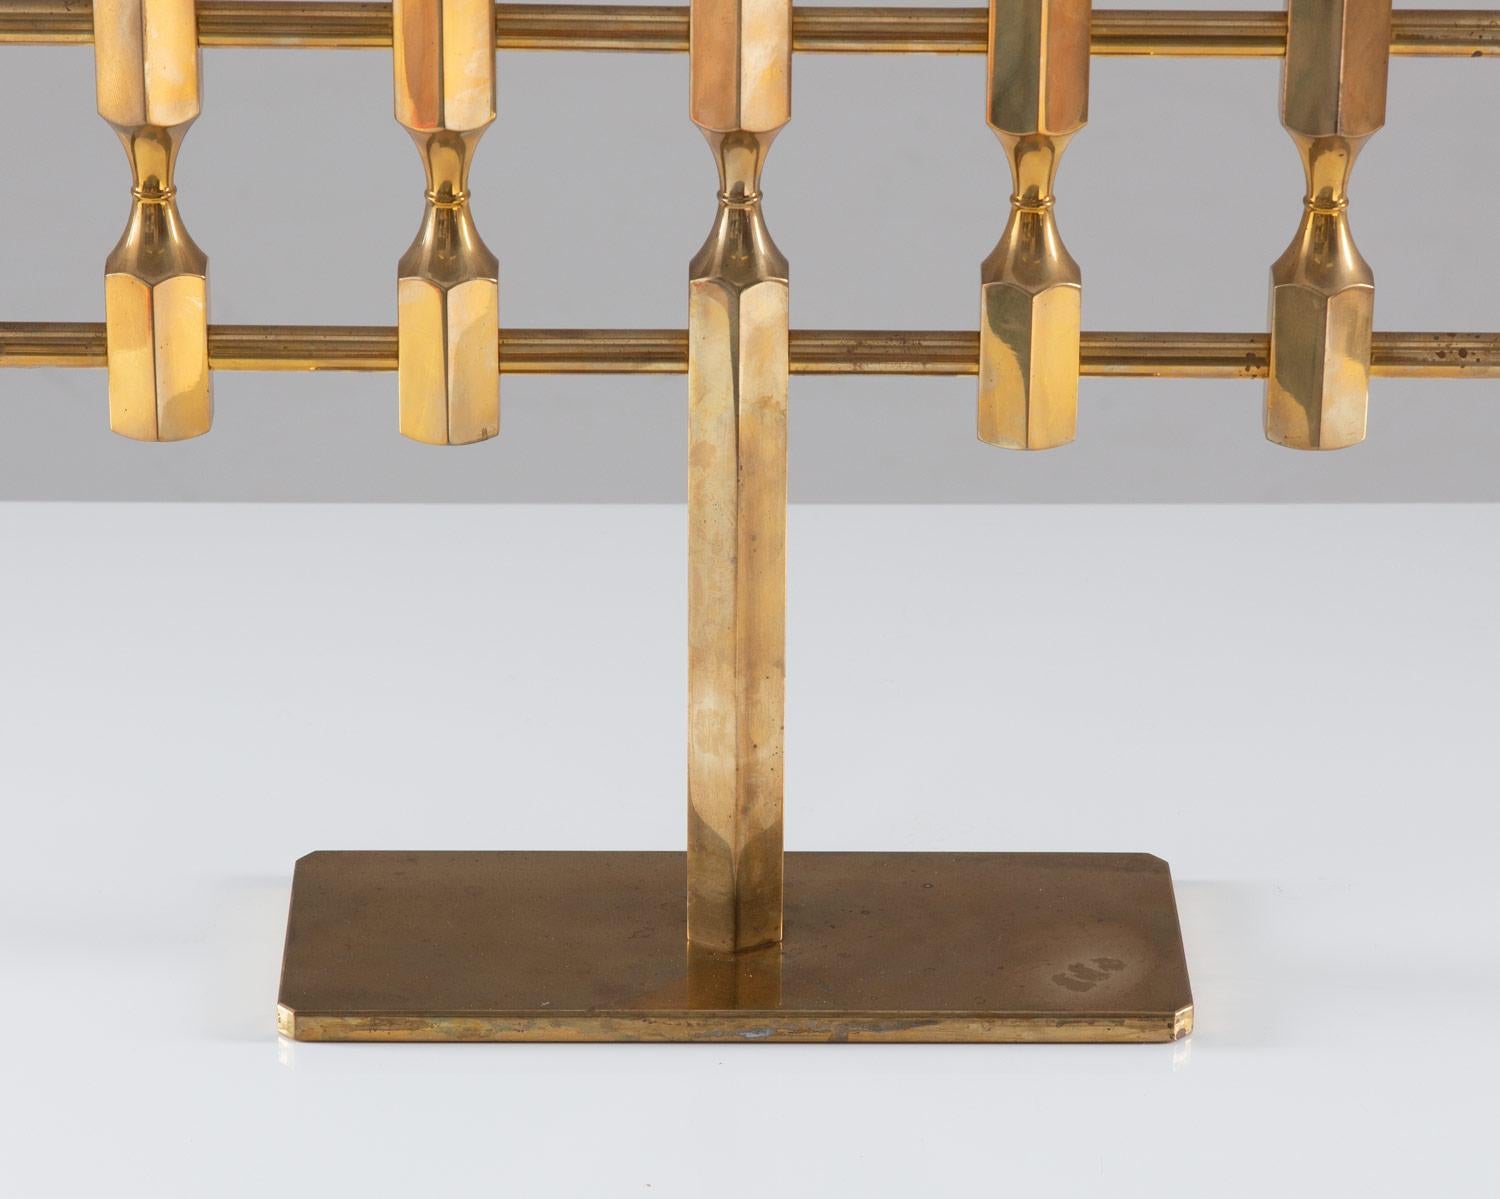 Pair of Large Swedish Candelabras in Brass by Lars Bergsten for Gusum In Good Condition For Sale In Karlstad, SE